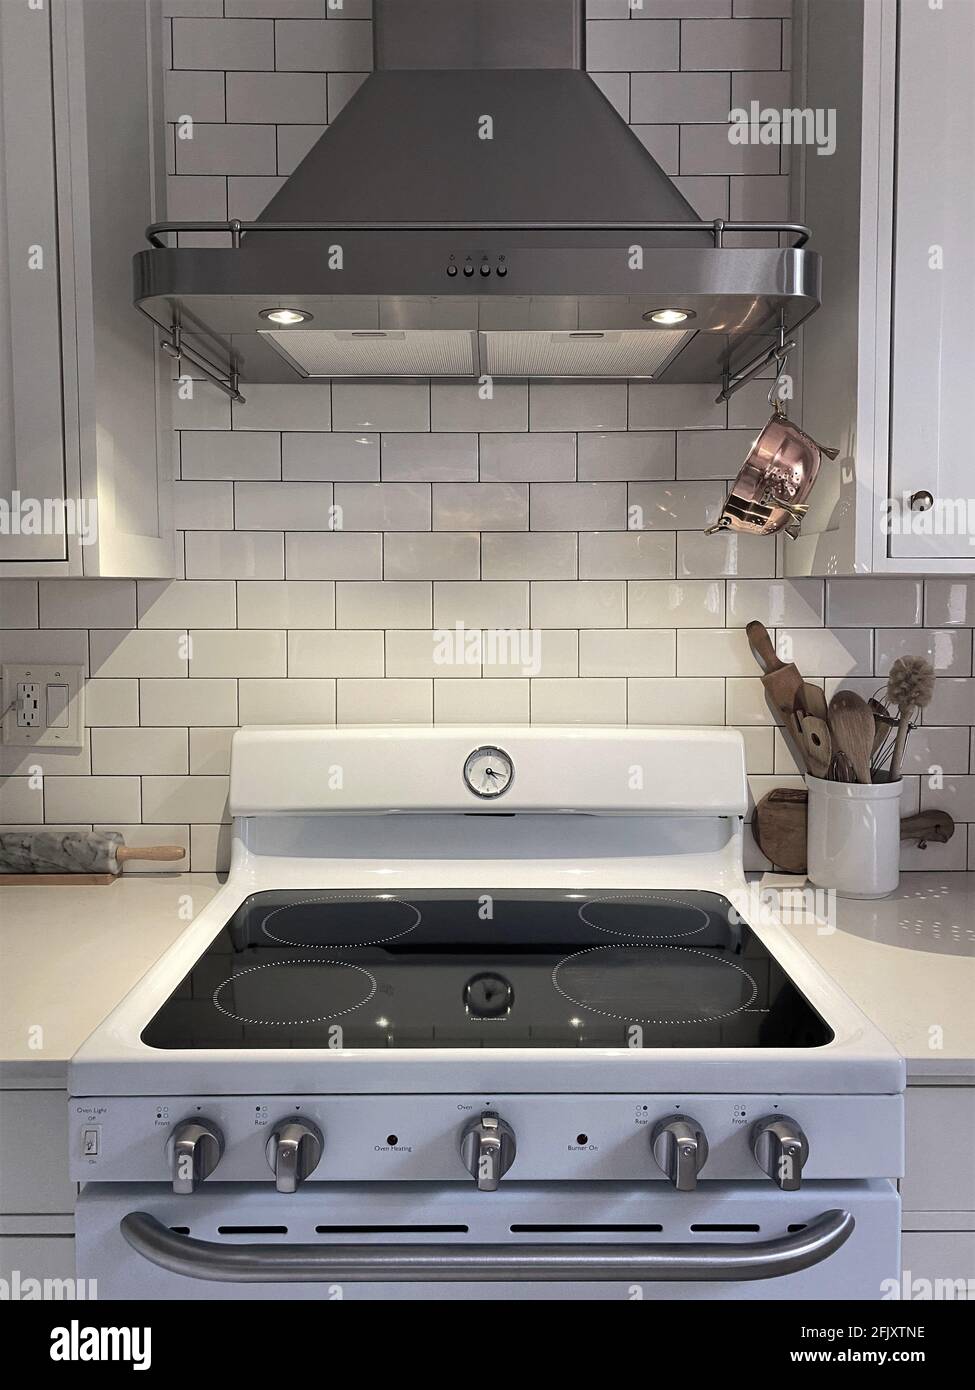 White Kitchen cupboard with subway tile. Kitchen utensils are in a bowl for cooking with small vintage copper colander hanging. Kitchen hood exhaust. Stock Photo